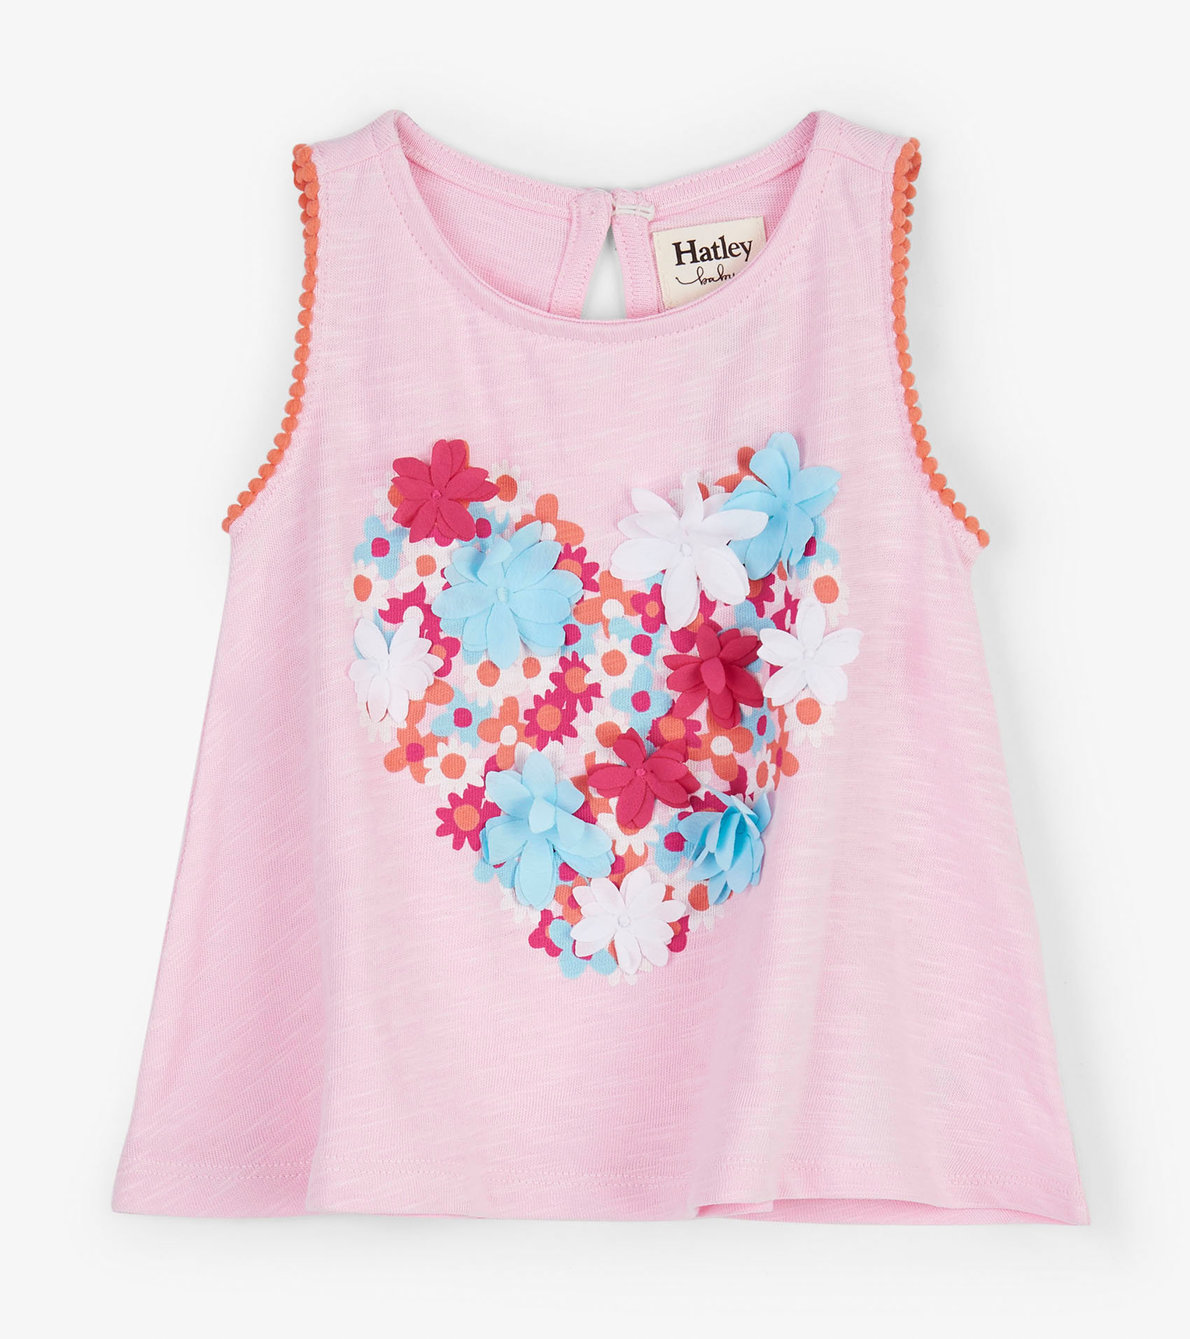 View larger image of Floral Heart Baby Tank Top